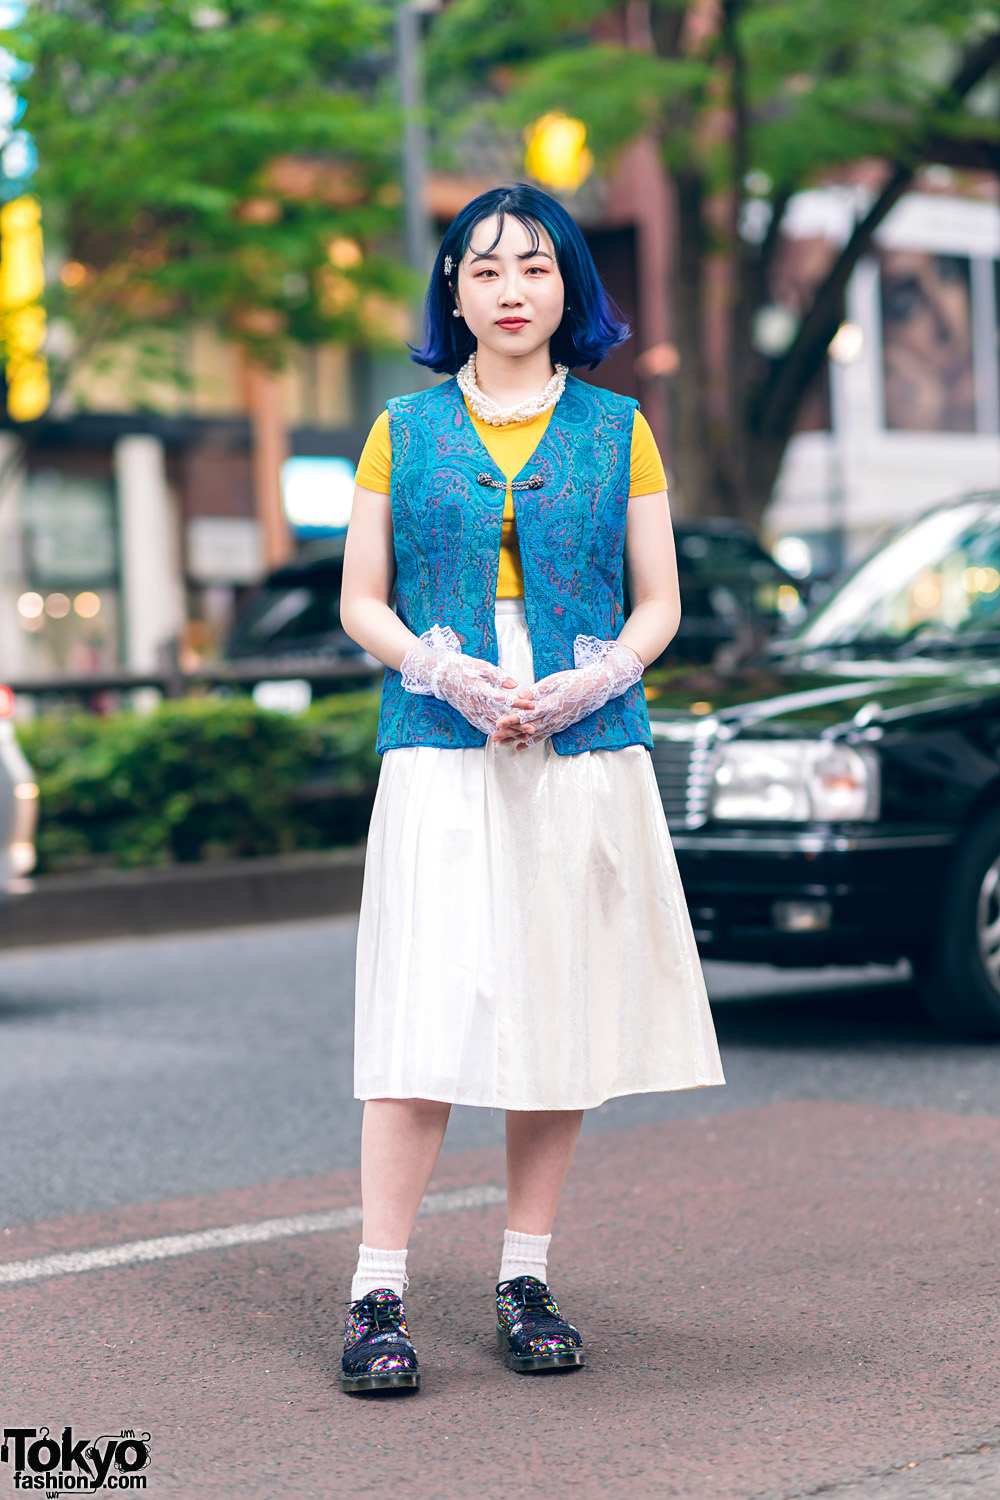 Harajuku Girl Streetwear Style w/ Blue Hair, Pearl Jewelry, Lace Gloves, Kinji Textured Vest, Forever21, Midi Skirt & Dr. Martens Sequin Shoes